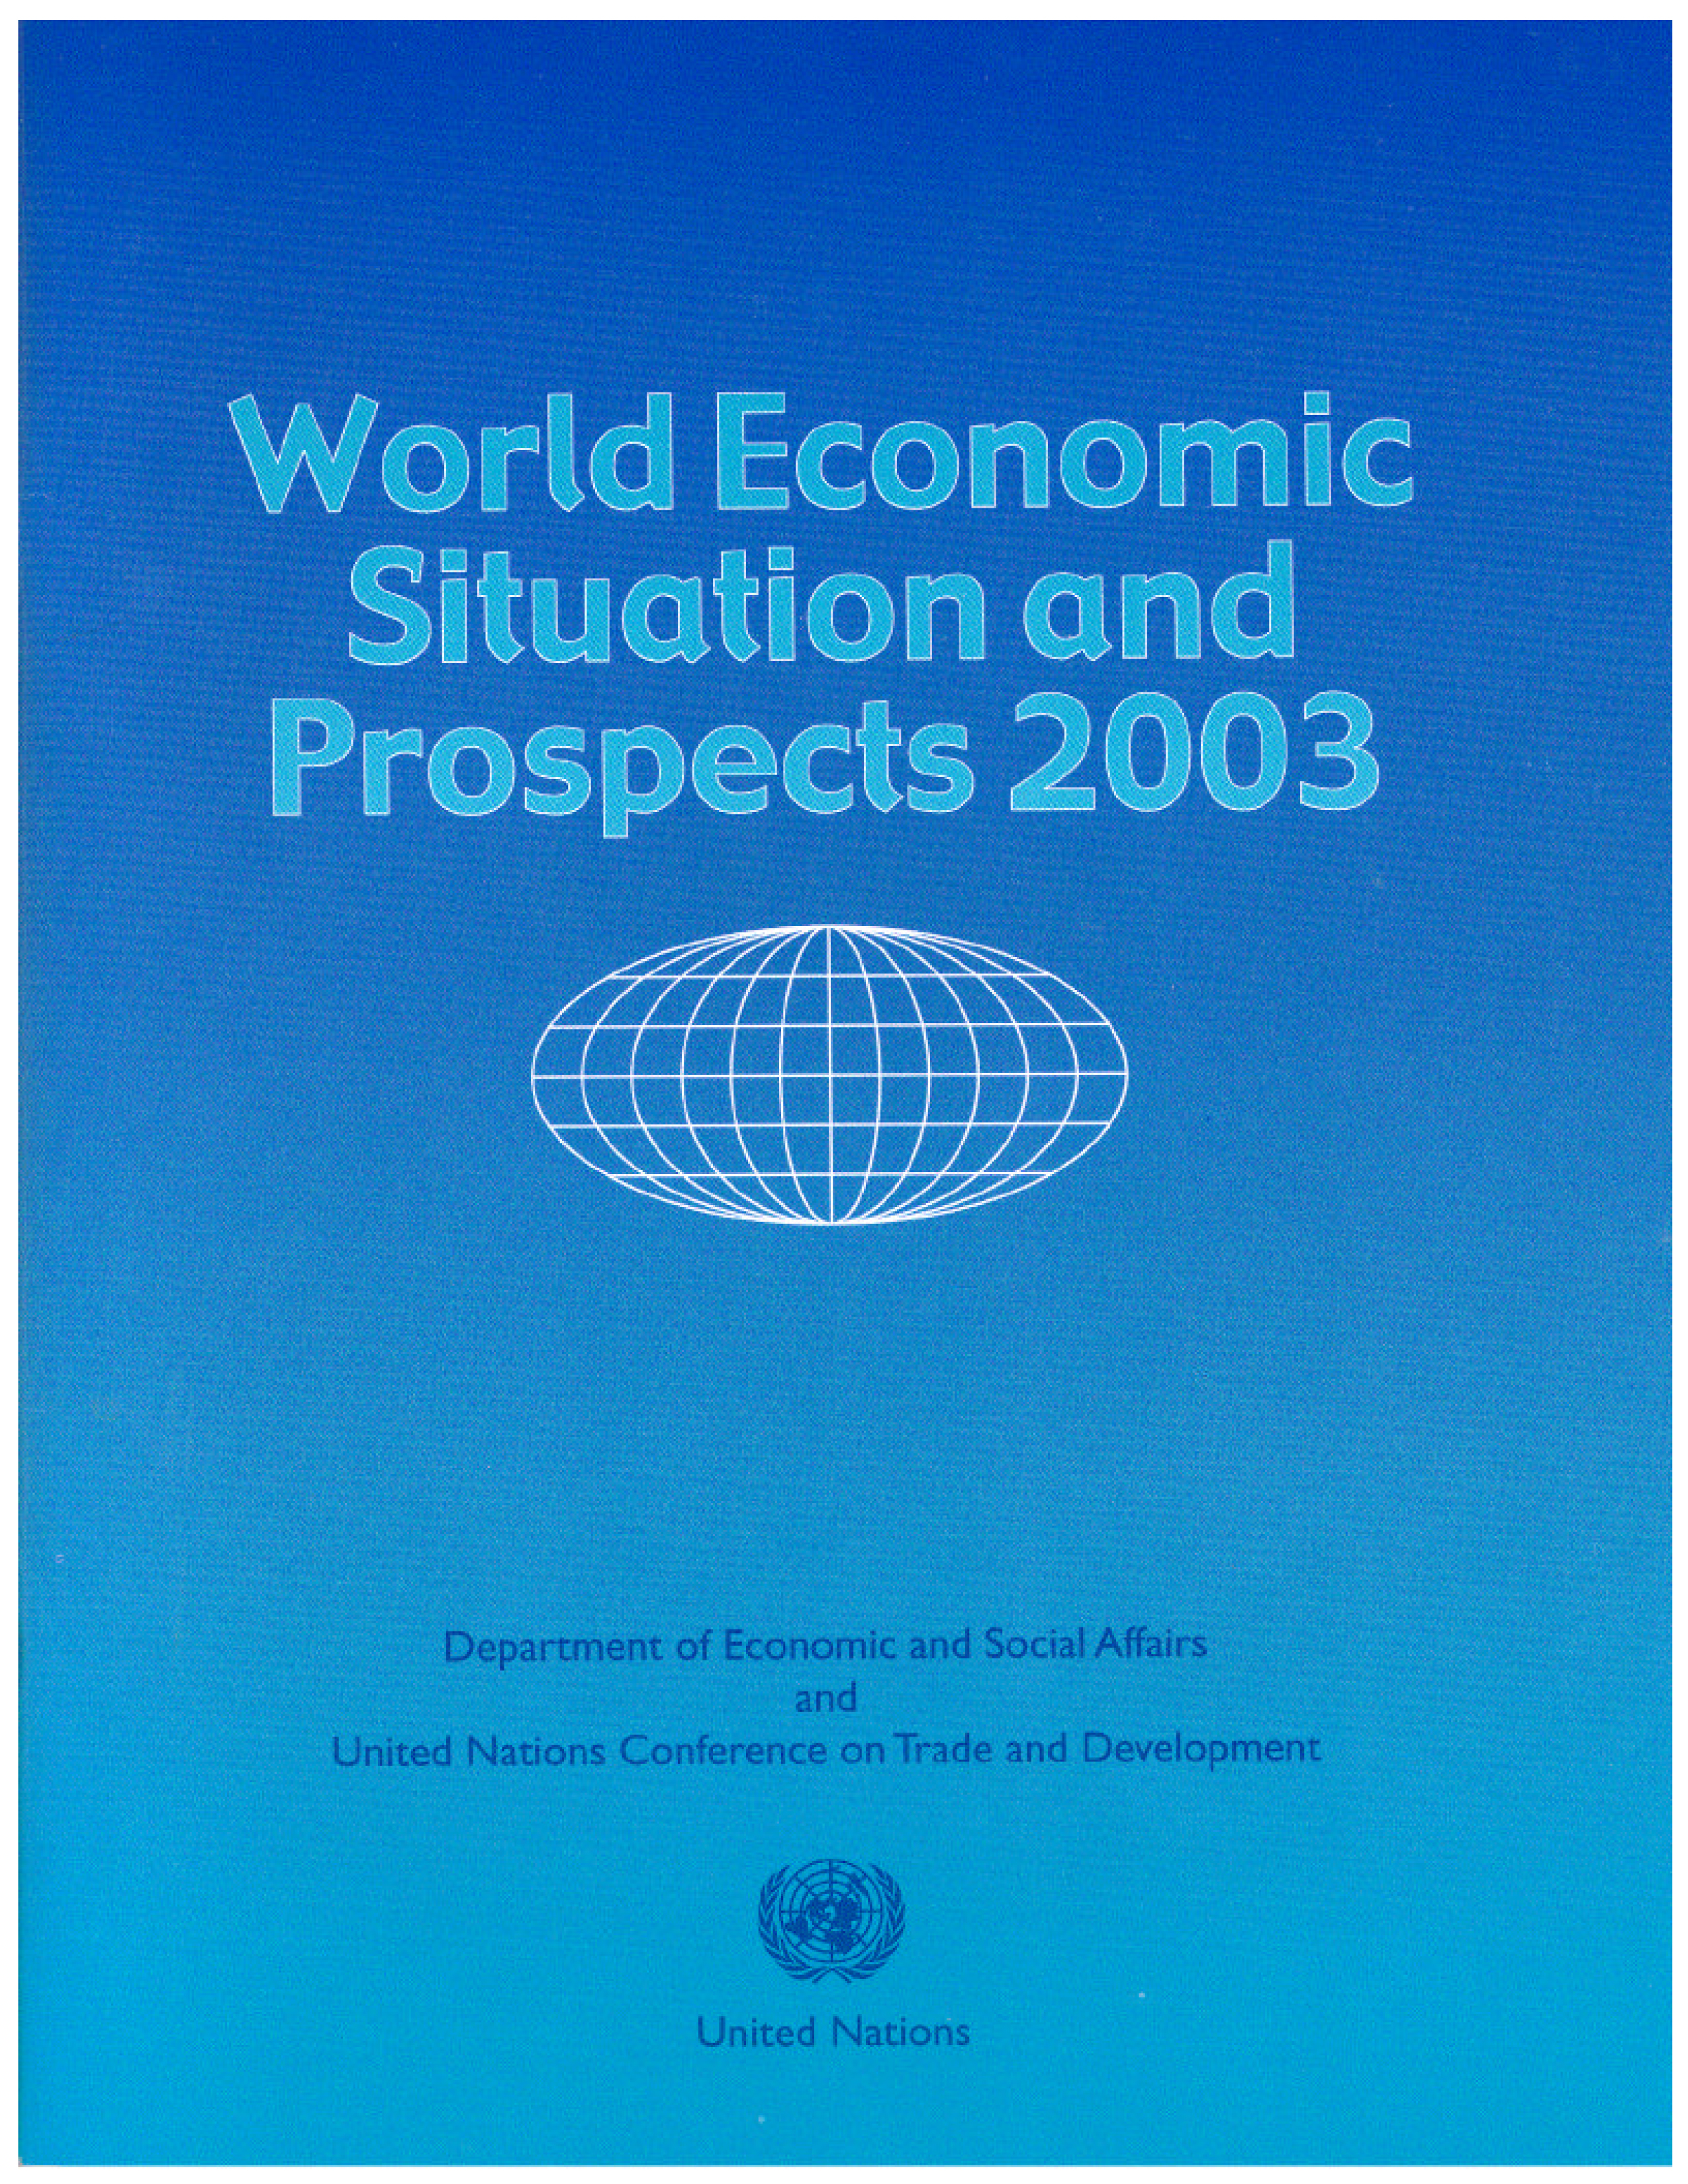 image of World Economic Situation and Prospects 2003